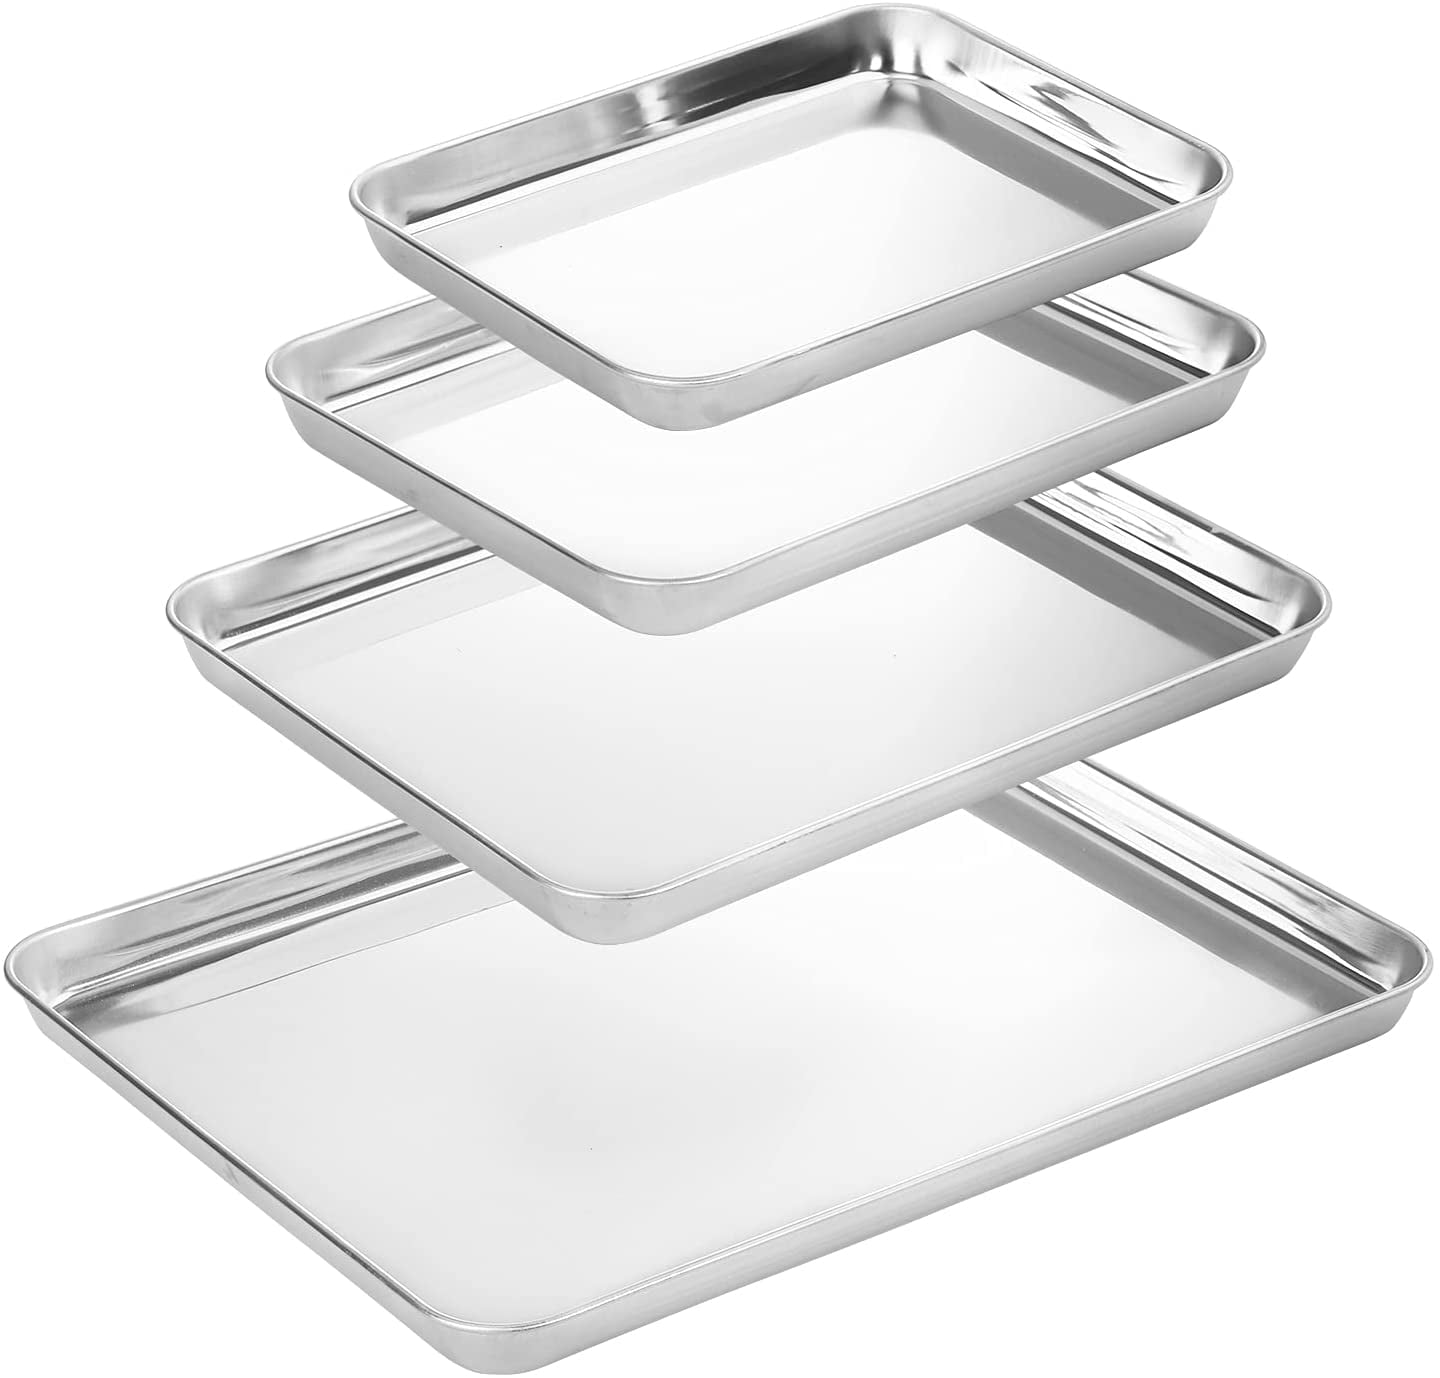 Wildone Baking Sheet Set of 2 - Stainless Steel Cookie Sheet Baking Pan,  Size 10 x 8 x 1 inch, Non Toxic & Heavy Duty & Mirror Finish & Rust Free 